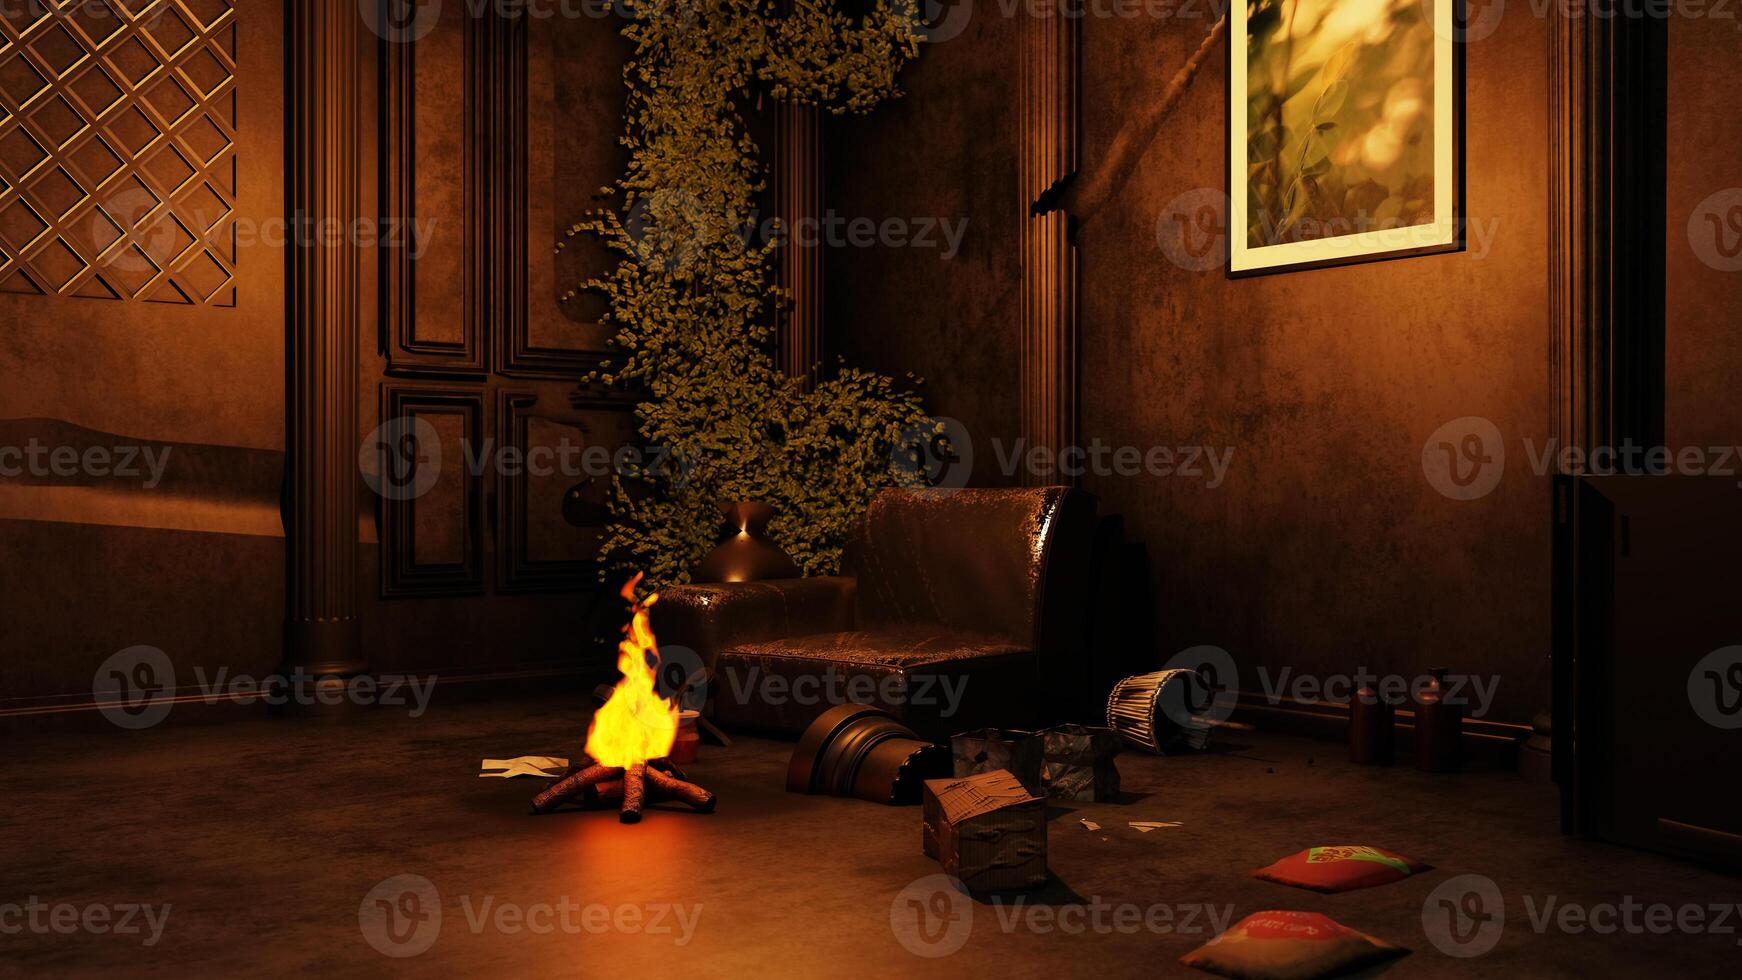 background of dirty abandoned apocalypse classic room with vines plant,3D illustration rendering photo